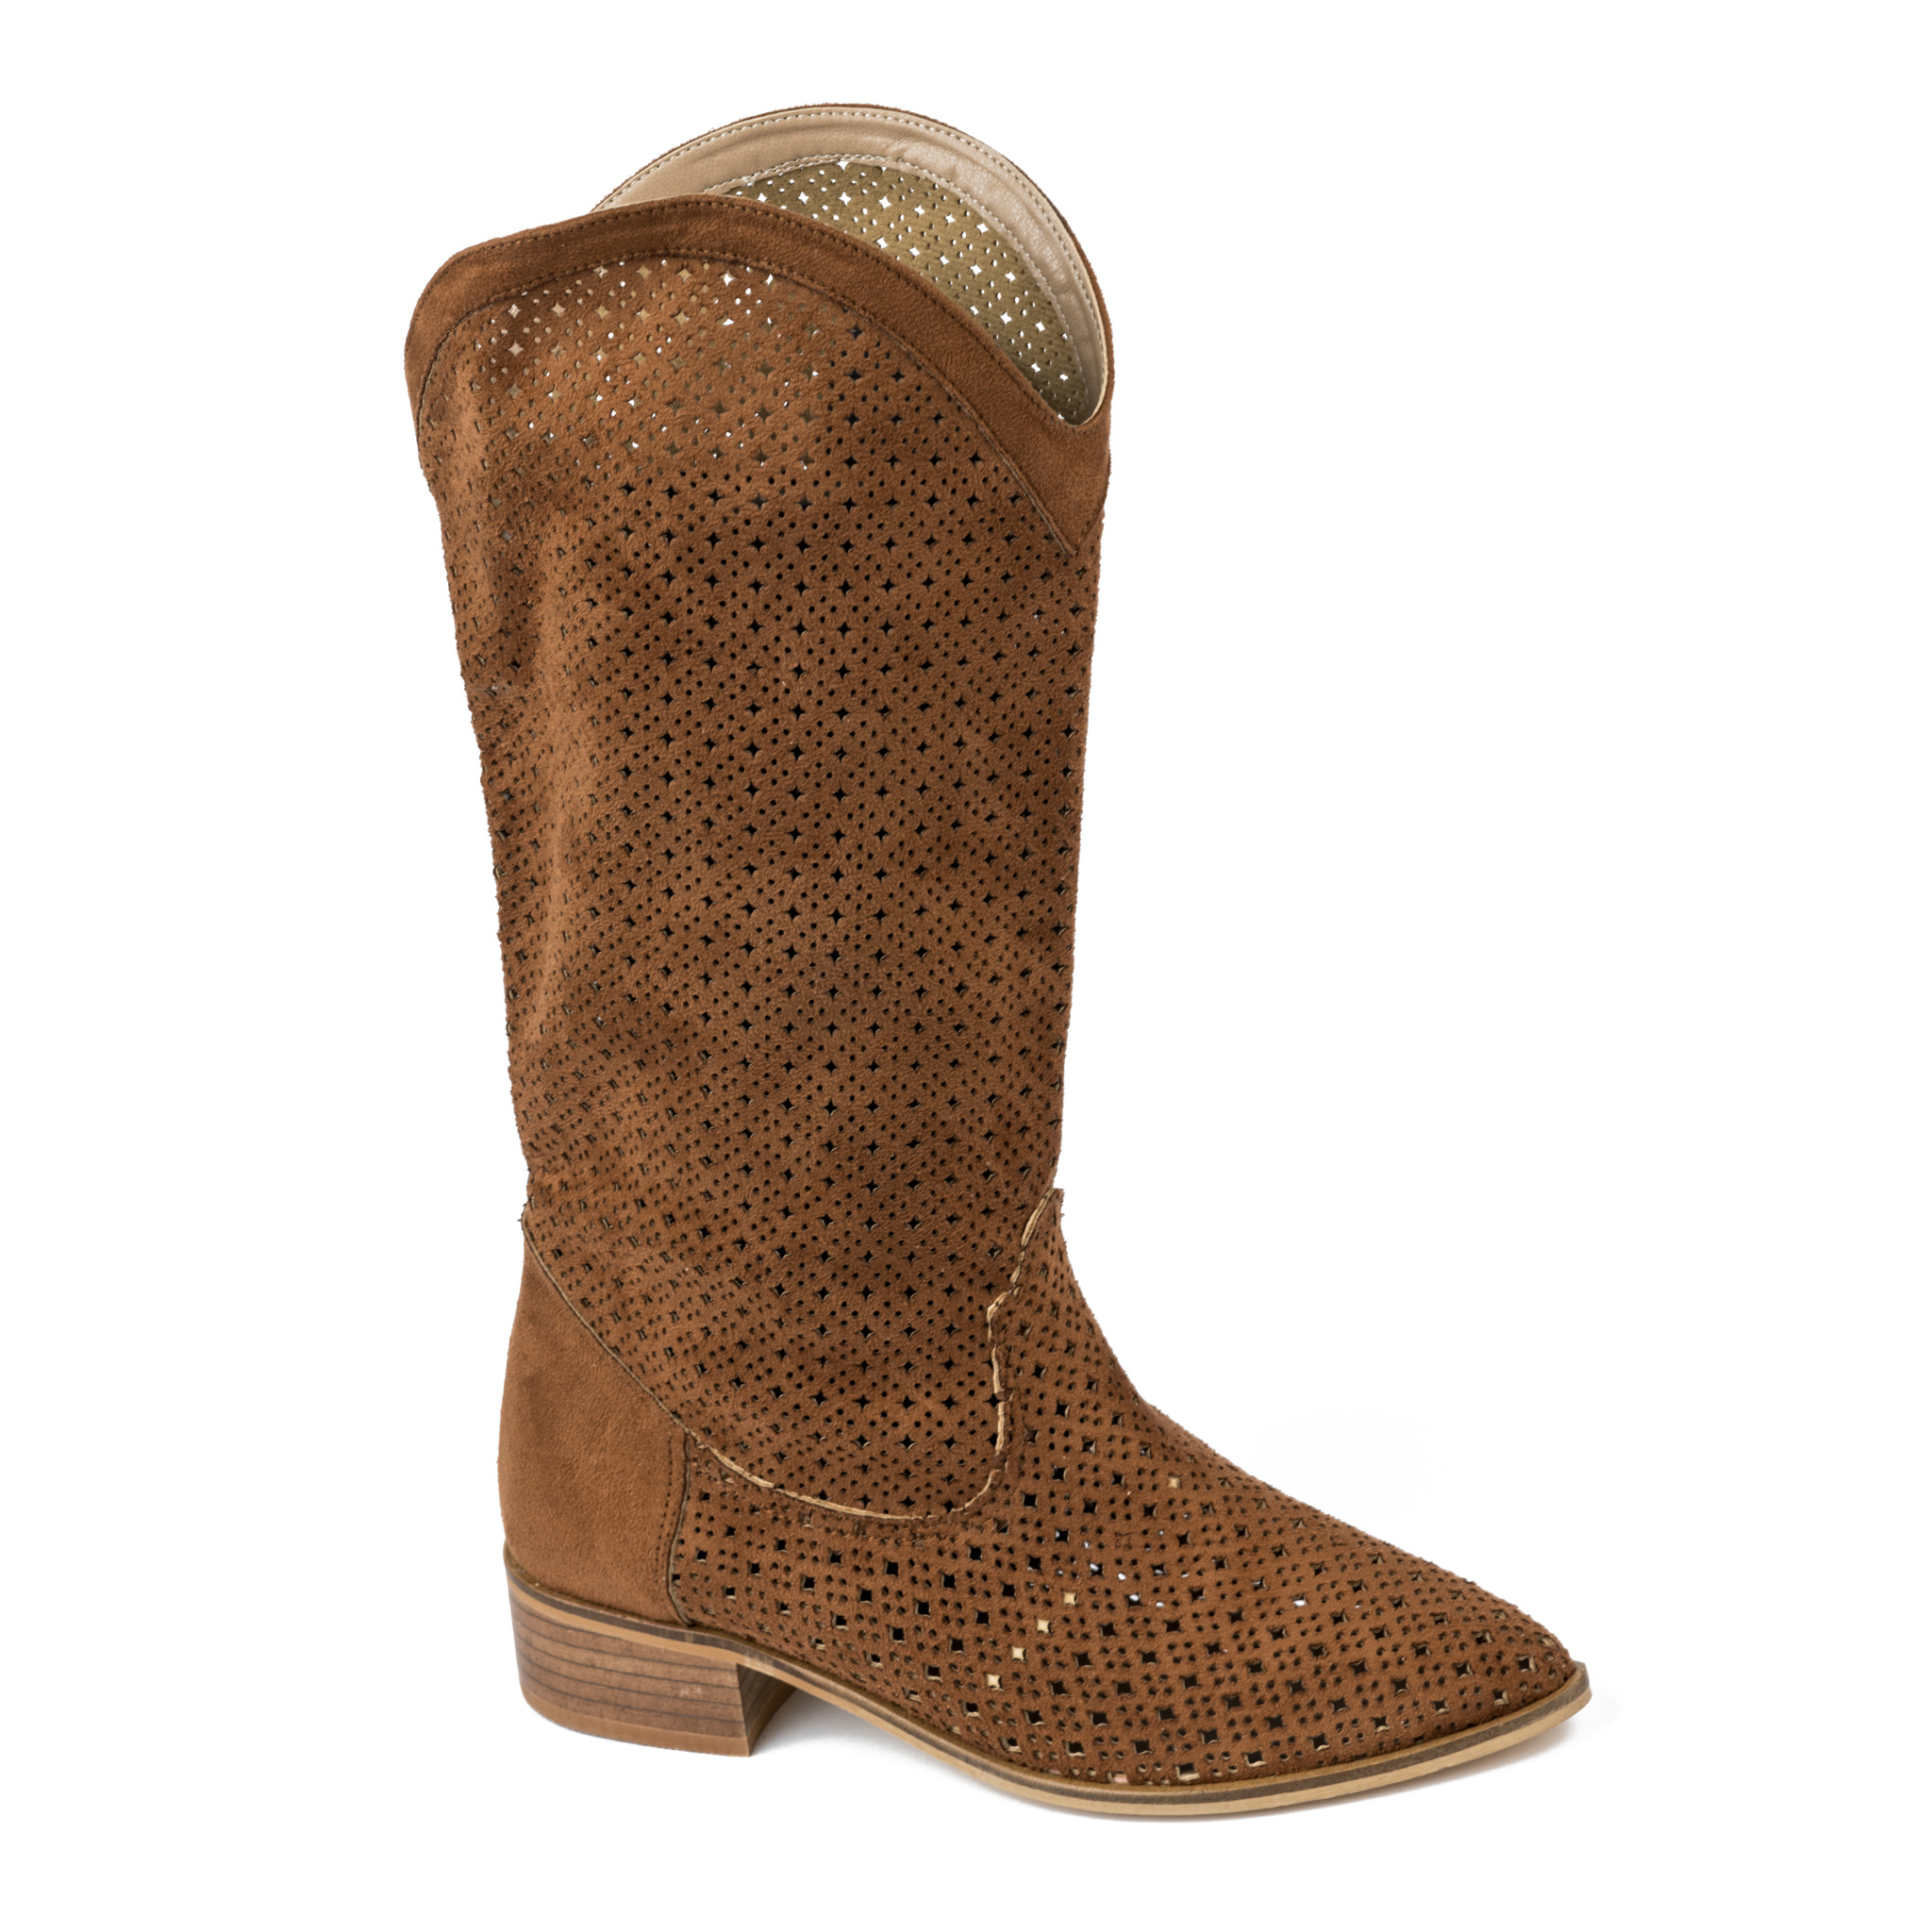 VELOUR HOLLOW PULL ON BOOTS - CAMEL